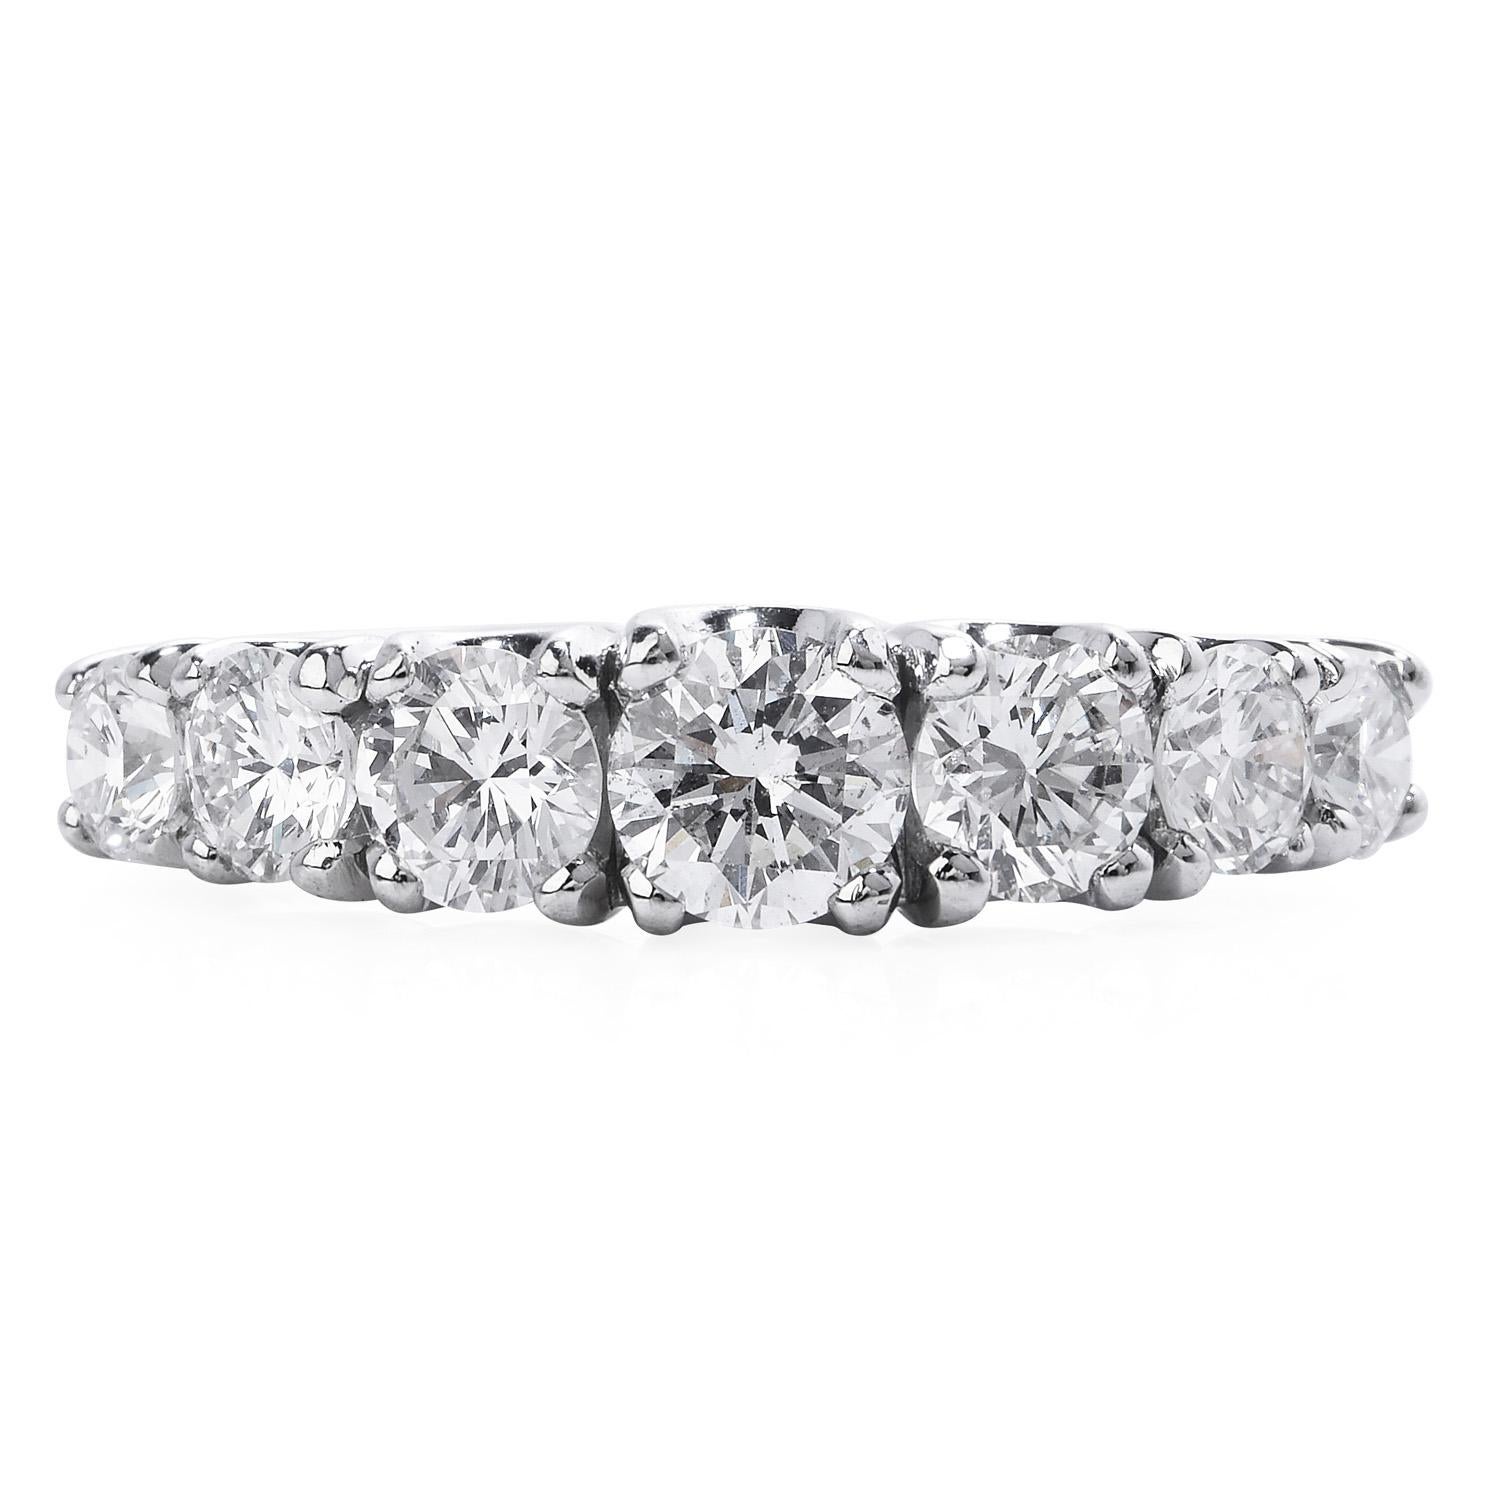 This enchanting diamond band ring is crafted in solid Platinum and is adorned with 7 genuine round cut Diamonds of approx: 1.45 carats, VS2 Clarity, G-H Color, Prong setting.

Featuring a polished finish, this lovely band ring remains in excellent